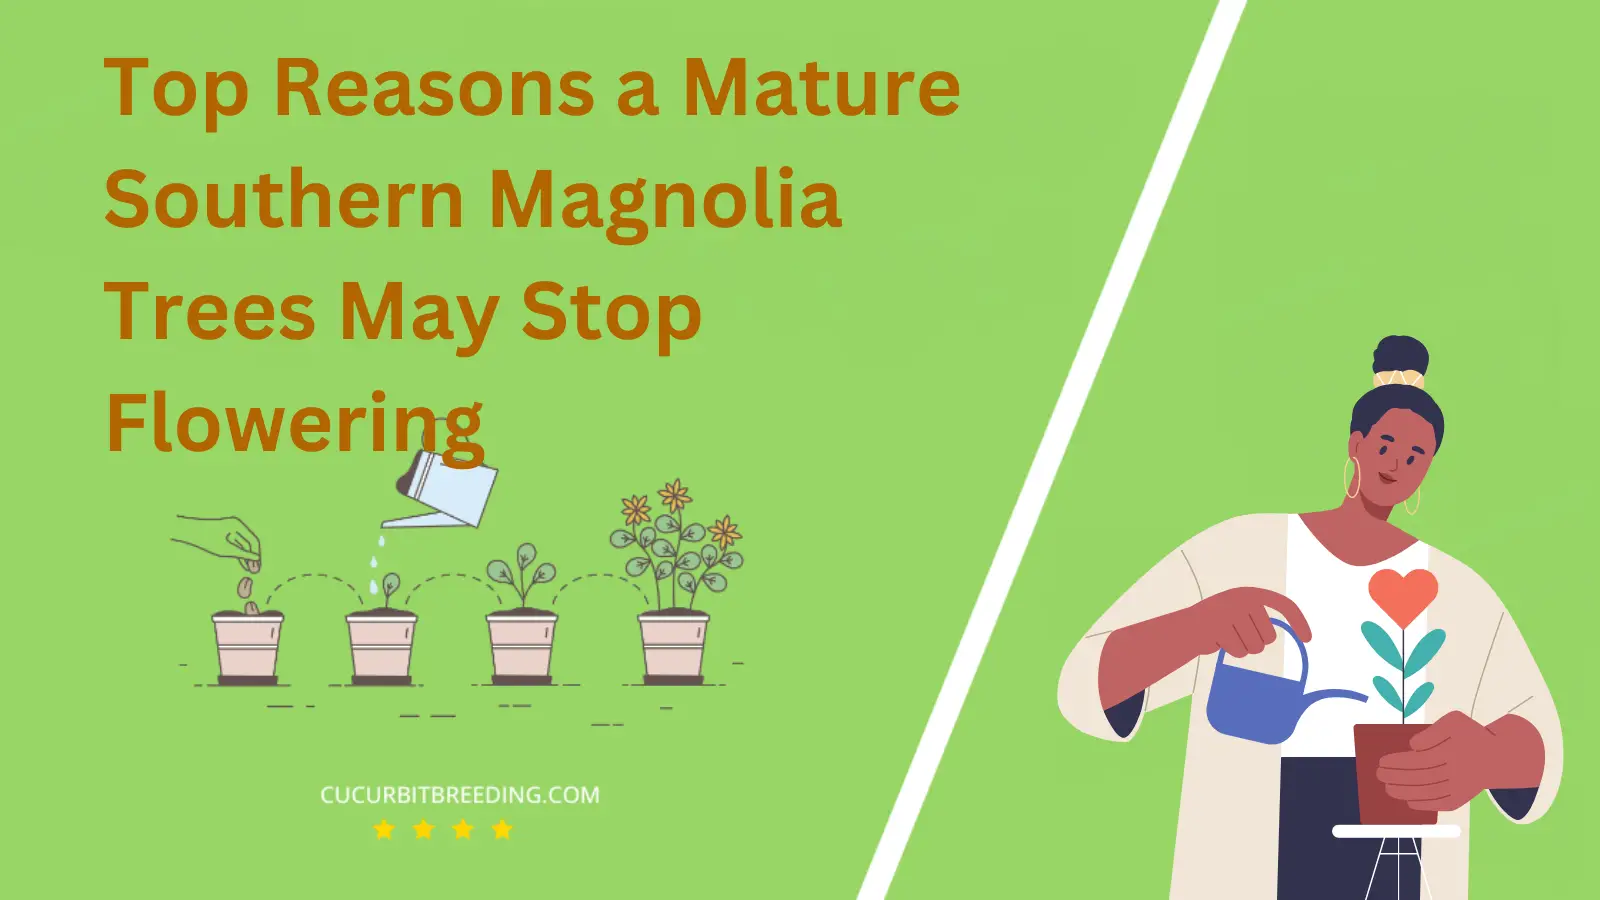 Top Reasons a Mature Southern Magnolia Trees May Stop Flowering